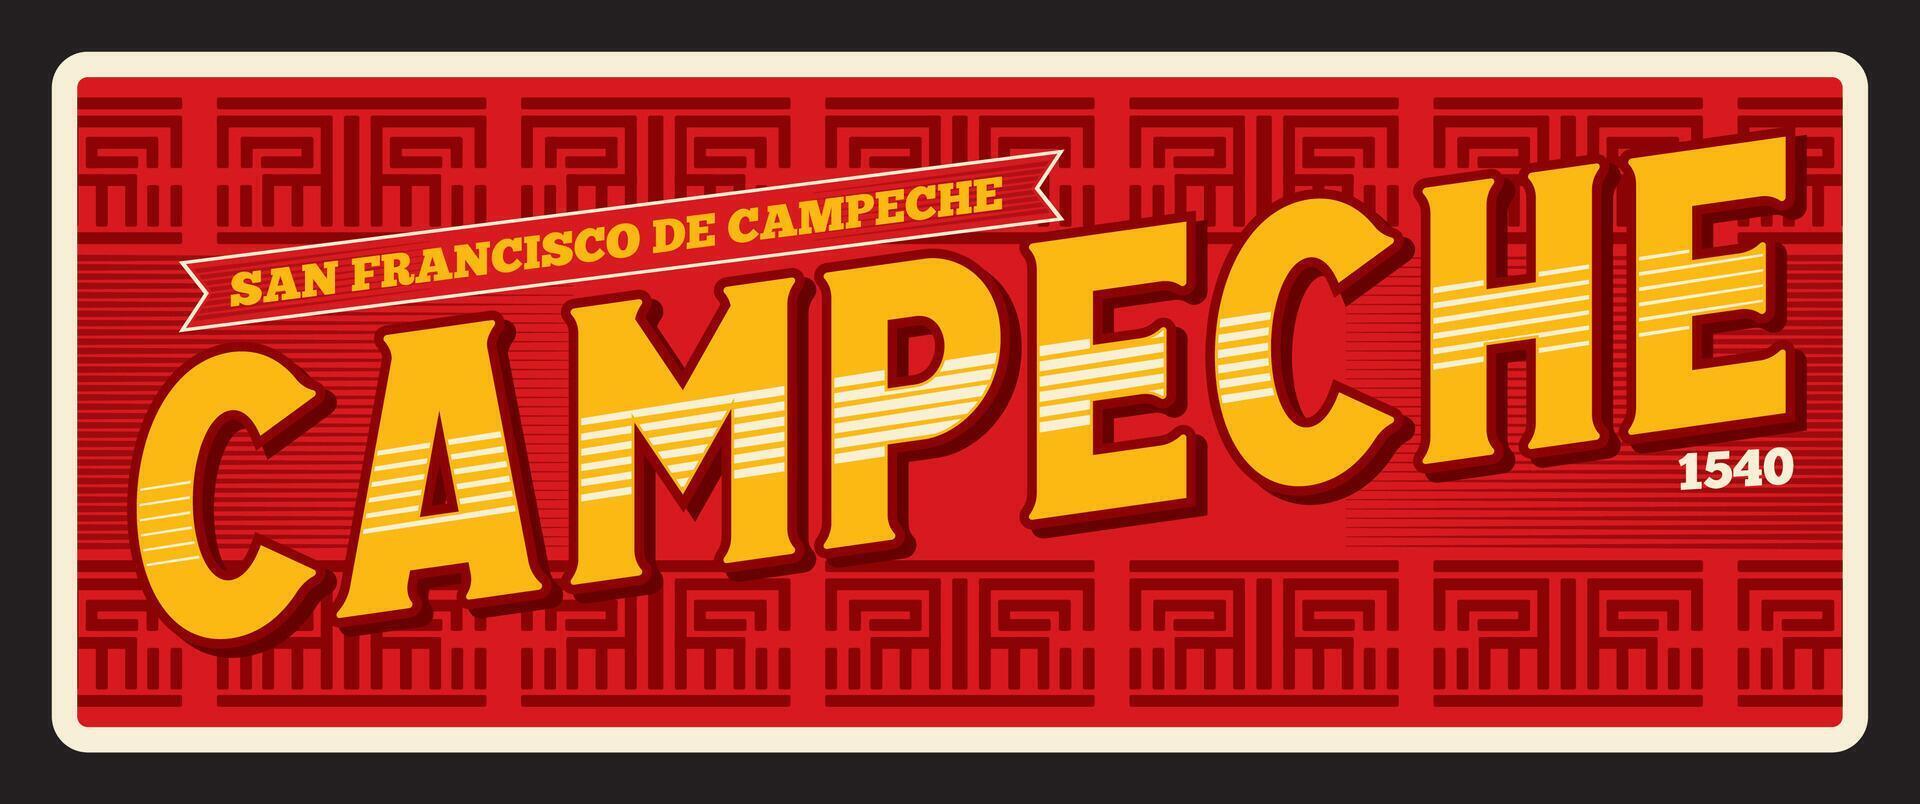 Campeche Mexico, vintage travel plate vector